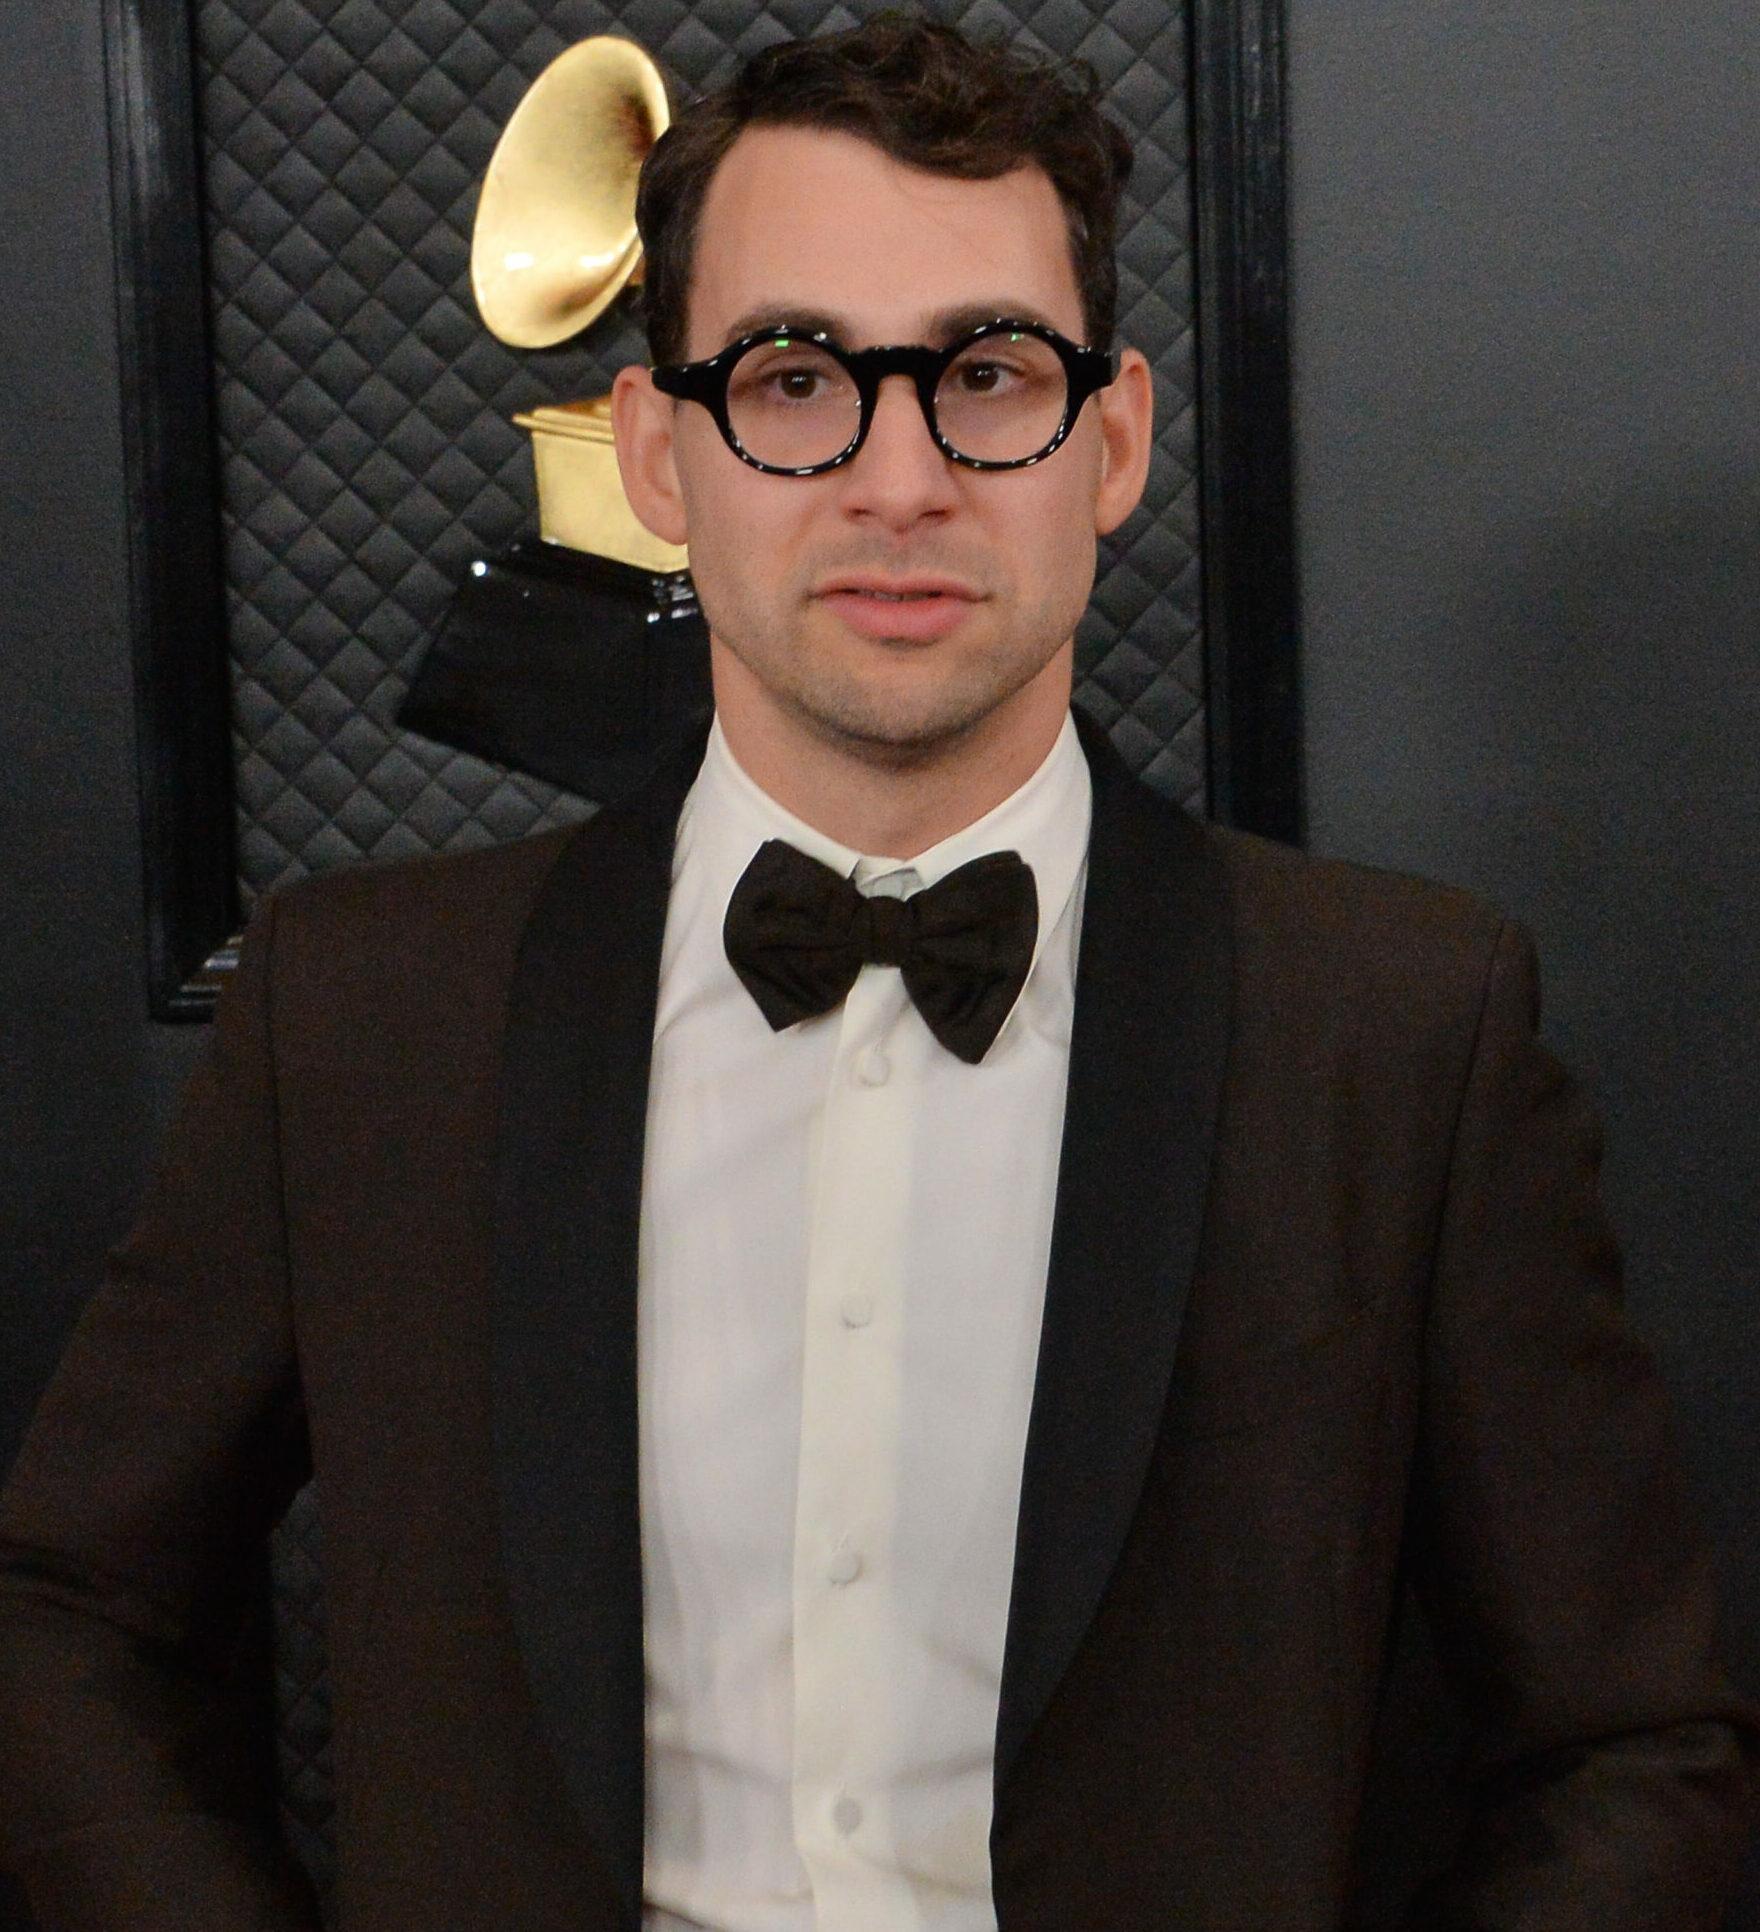 Jack Antonoff arrives for the 62nd annual Grammy Awards held at Staples Center in Los Angeles on Sunday, January 26, 2020.